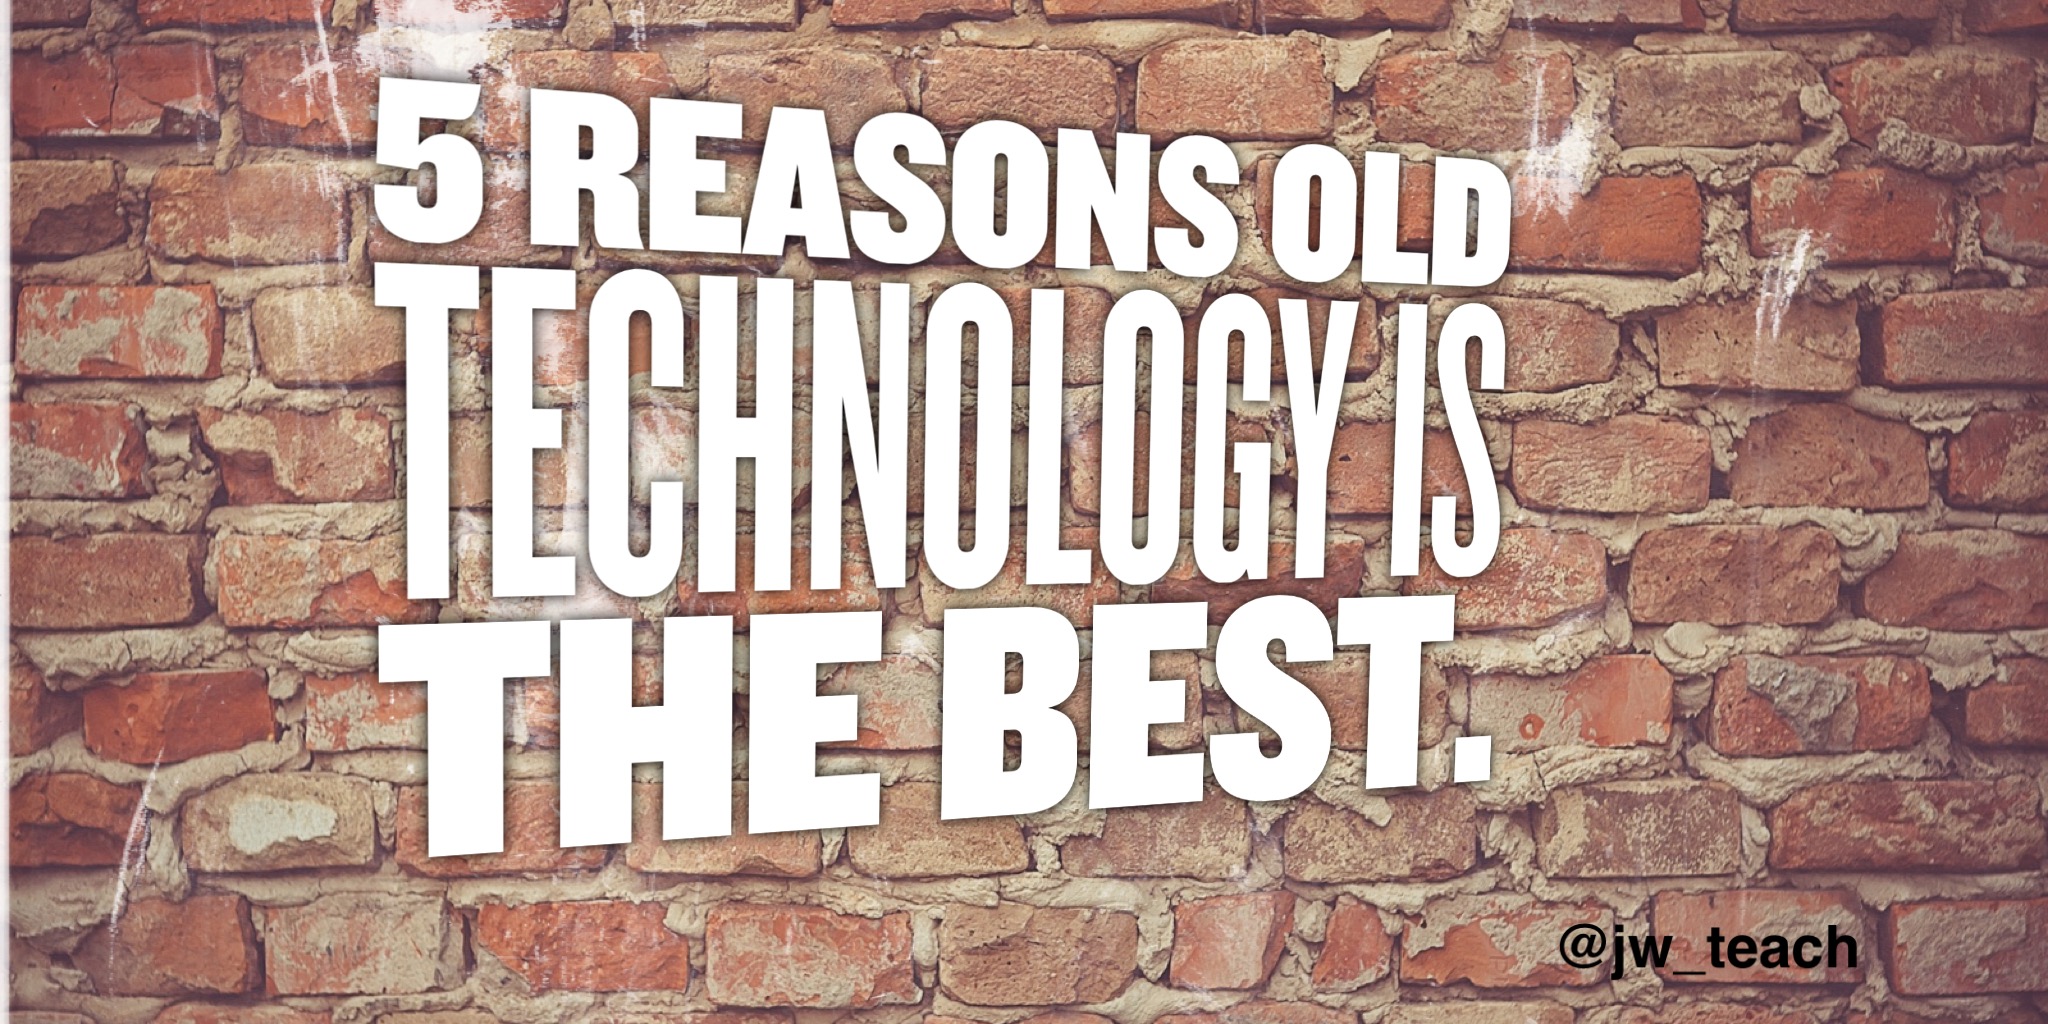 5 Reasons old technology is the best.